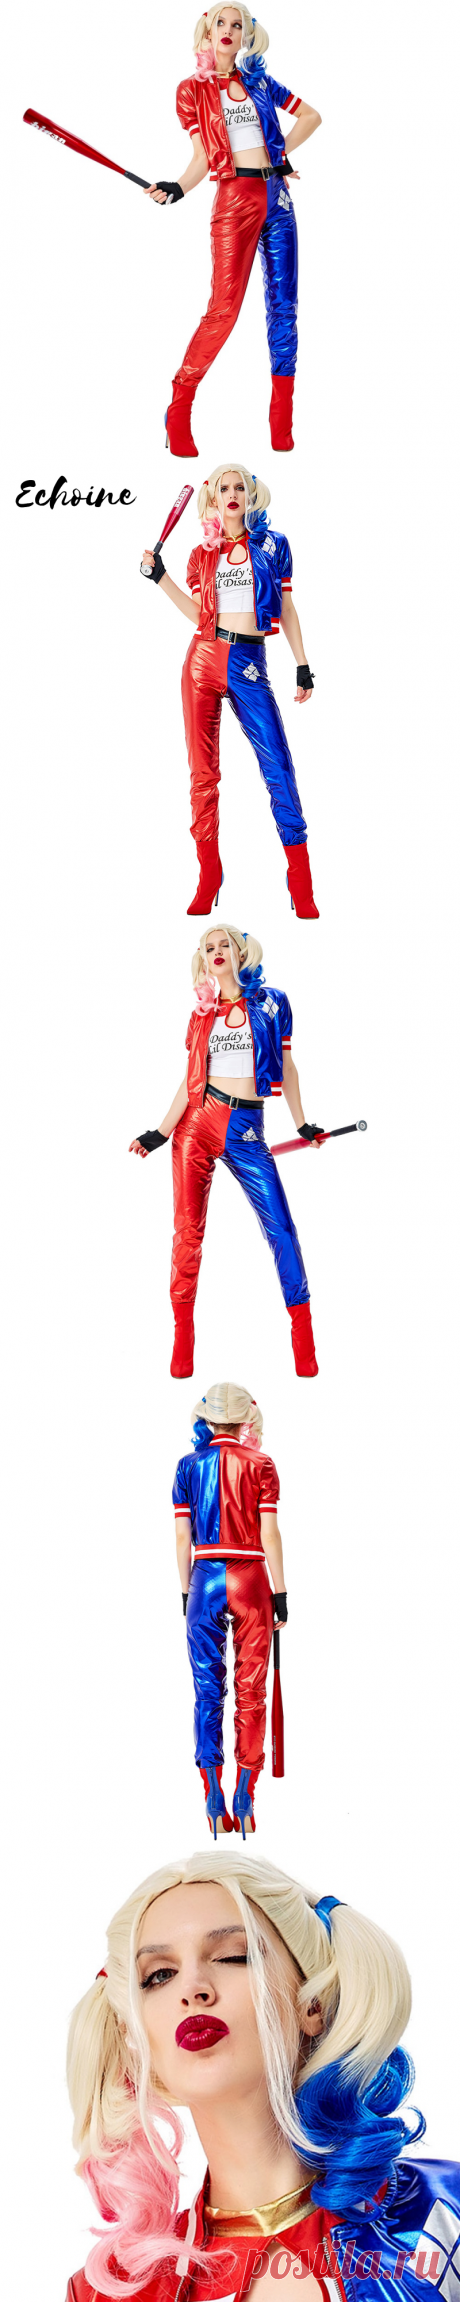 Echoine Deluxe Harley Quinn Costume Cosplay Adult Halloween Costume For Women Superhero Costume For Adult Carnival Party Suit